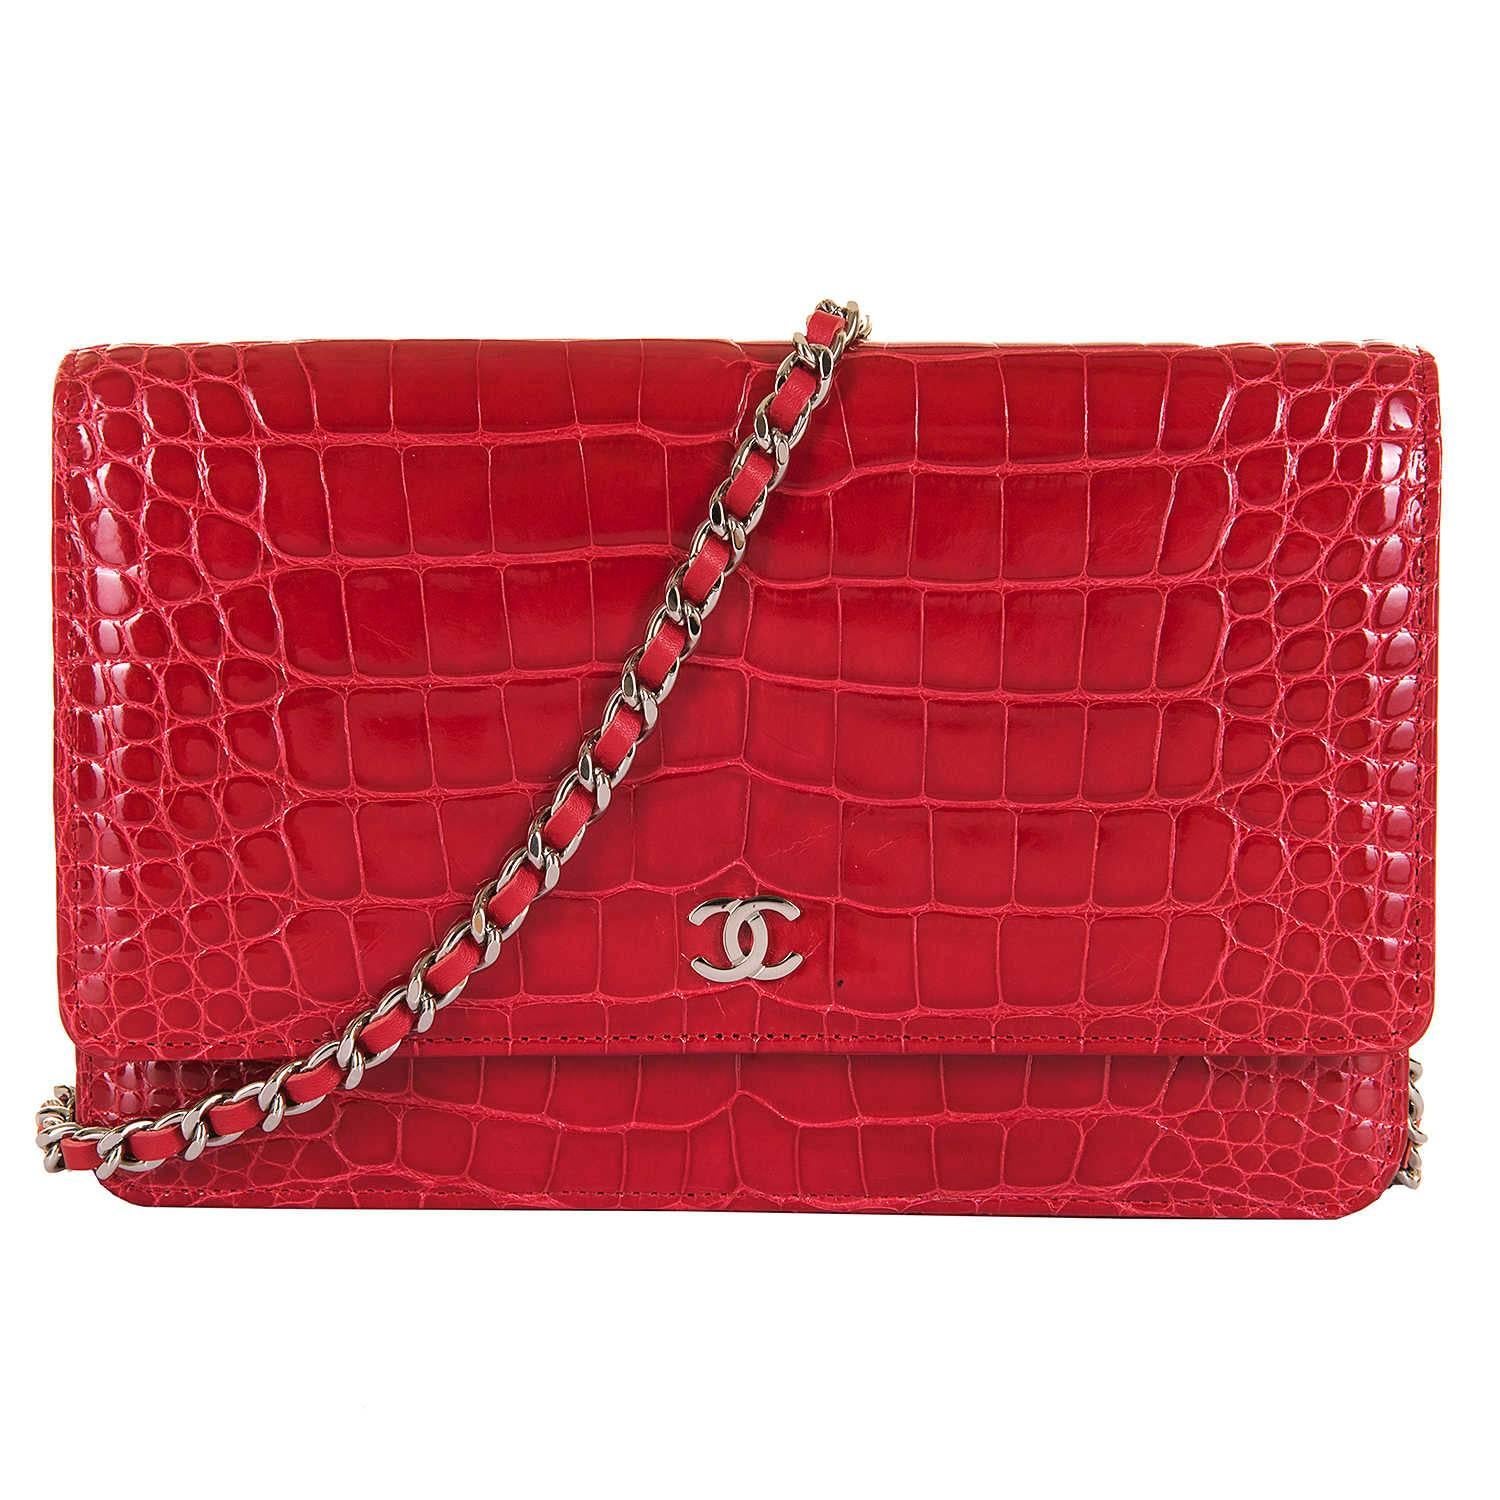 SO SO RARE Chanel Imperial Red Alligator WOC/Bag with Silver Palladium Hardware